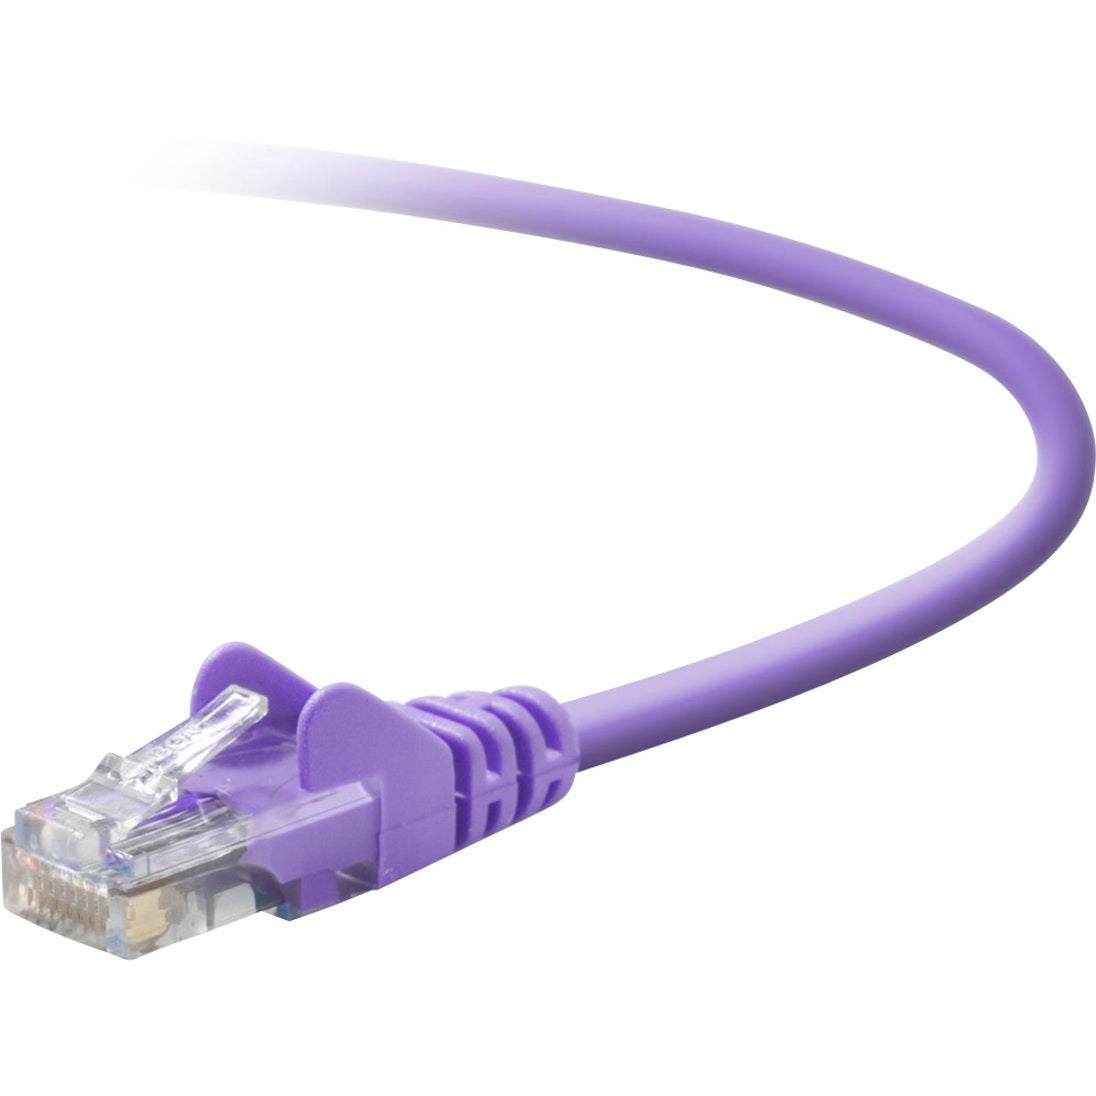 Belkin A3X126-06-PUR-S Category 5e Snagless Crossover Patch Cable, 6 ft, Purple